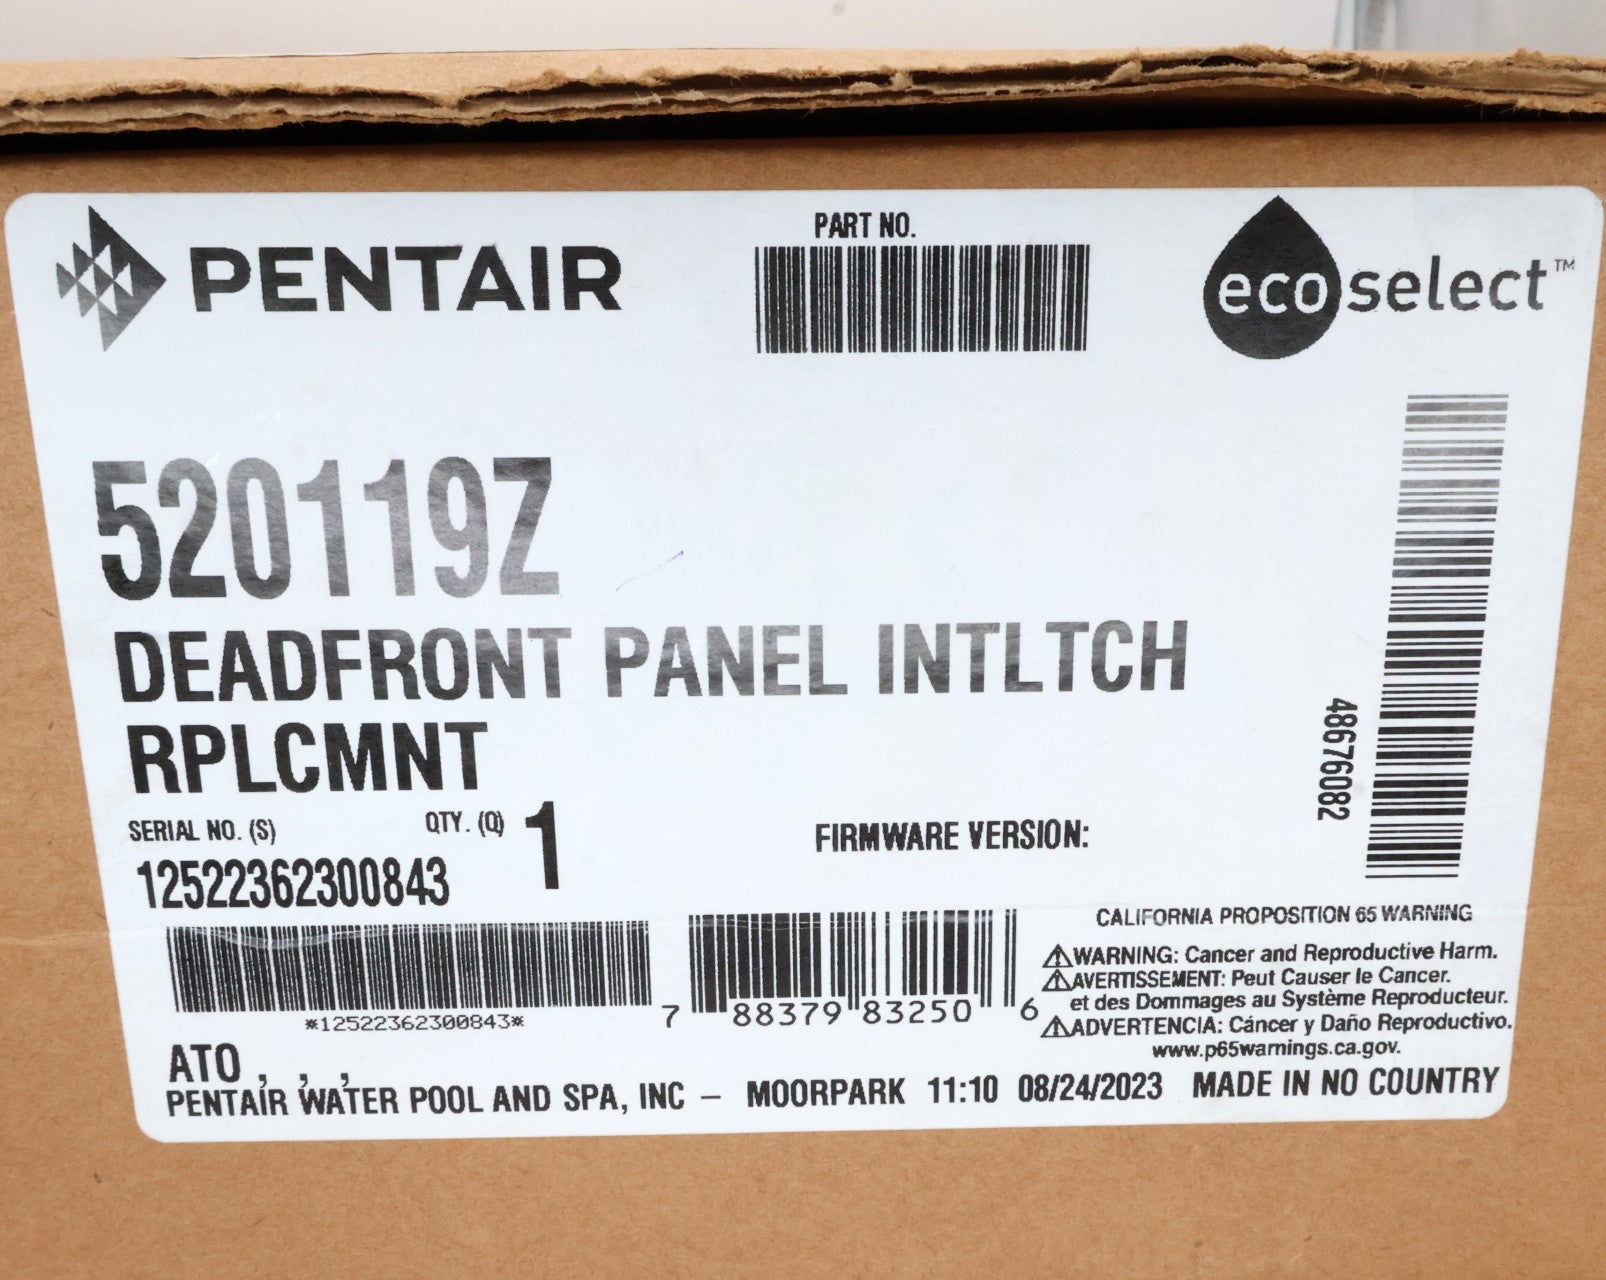 Pentair Old LC High Voltage Panel Cover for IntelliTouch Automation 520119Z - Pool Automation - img-4